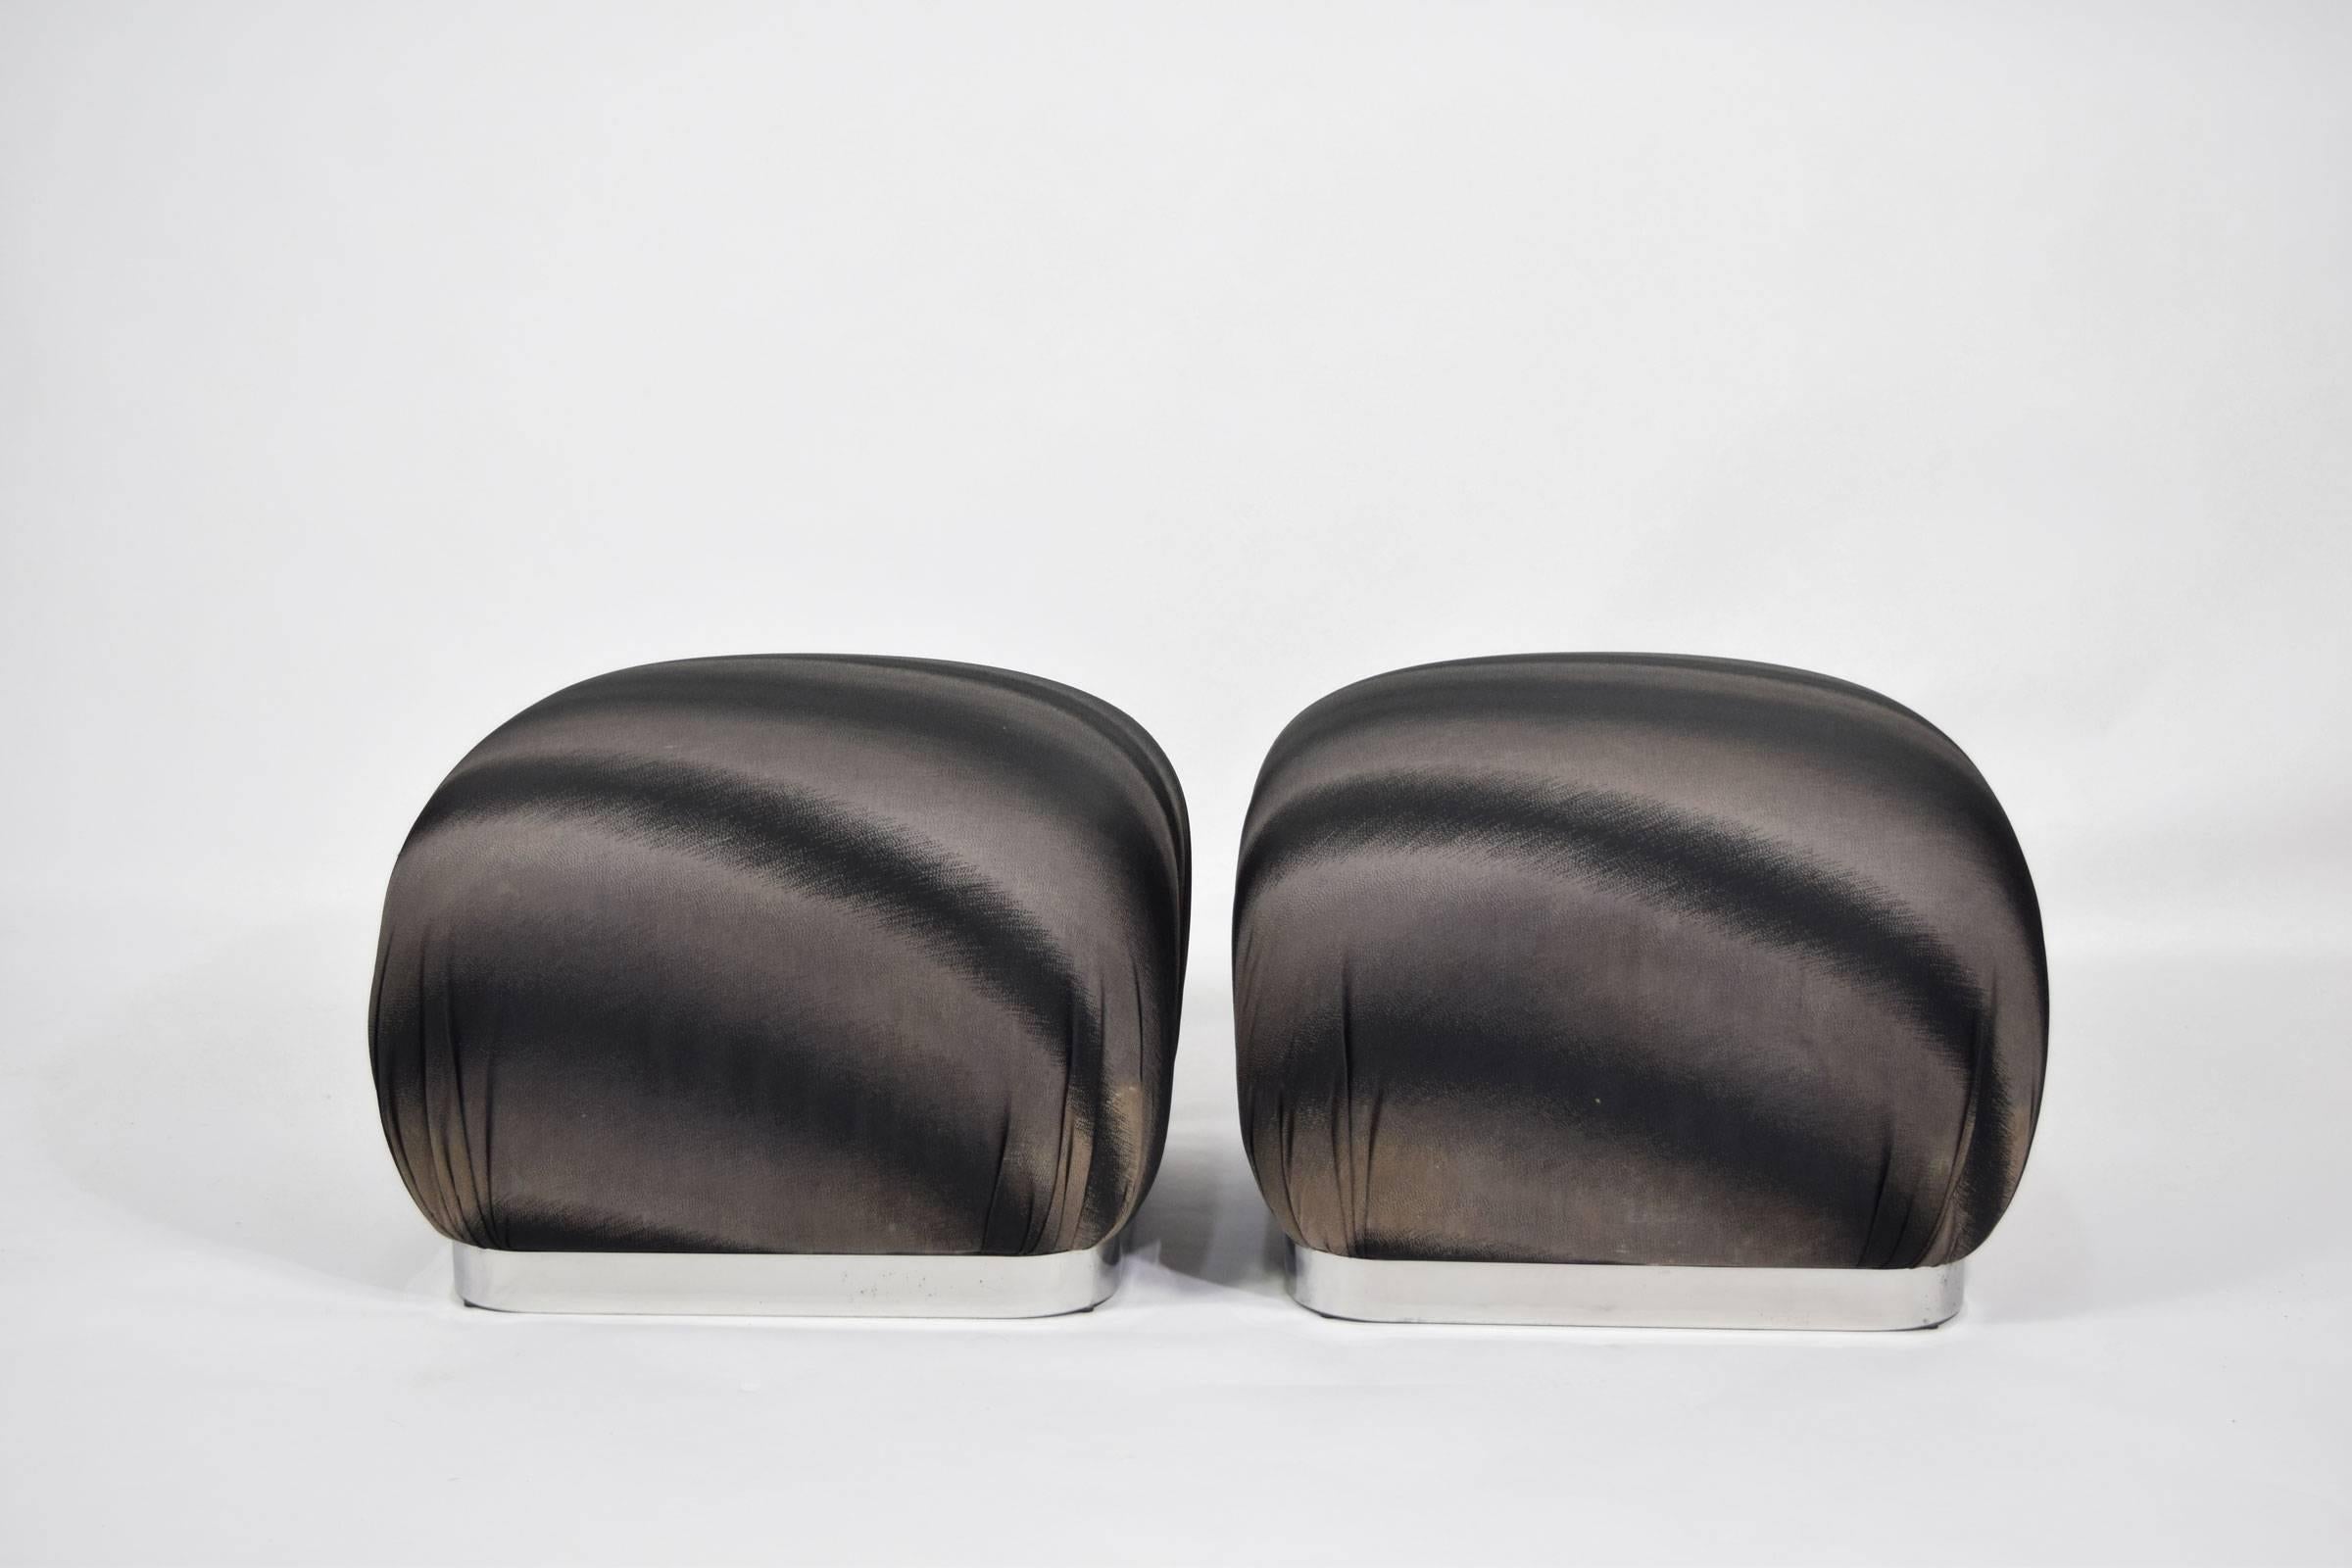 Pair of Souffle poufs in the style of Karl Springer by Weiman. Have chrome trim on base.